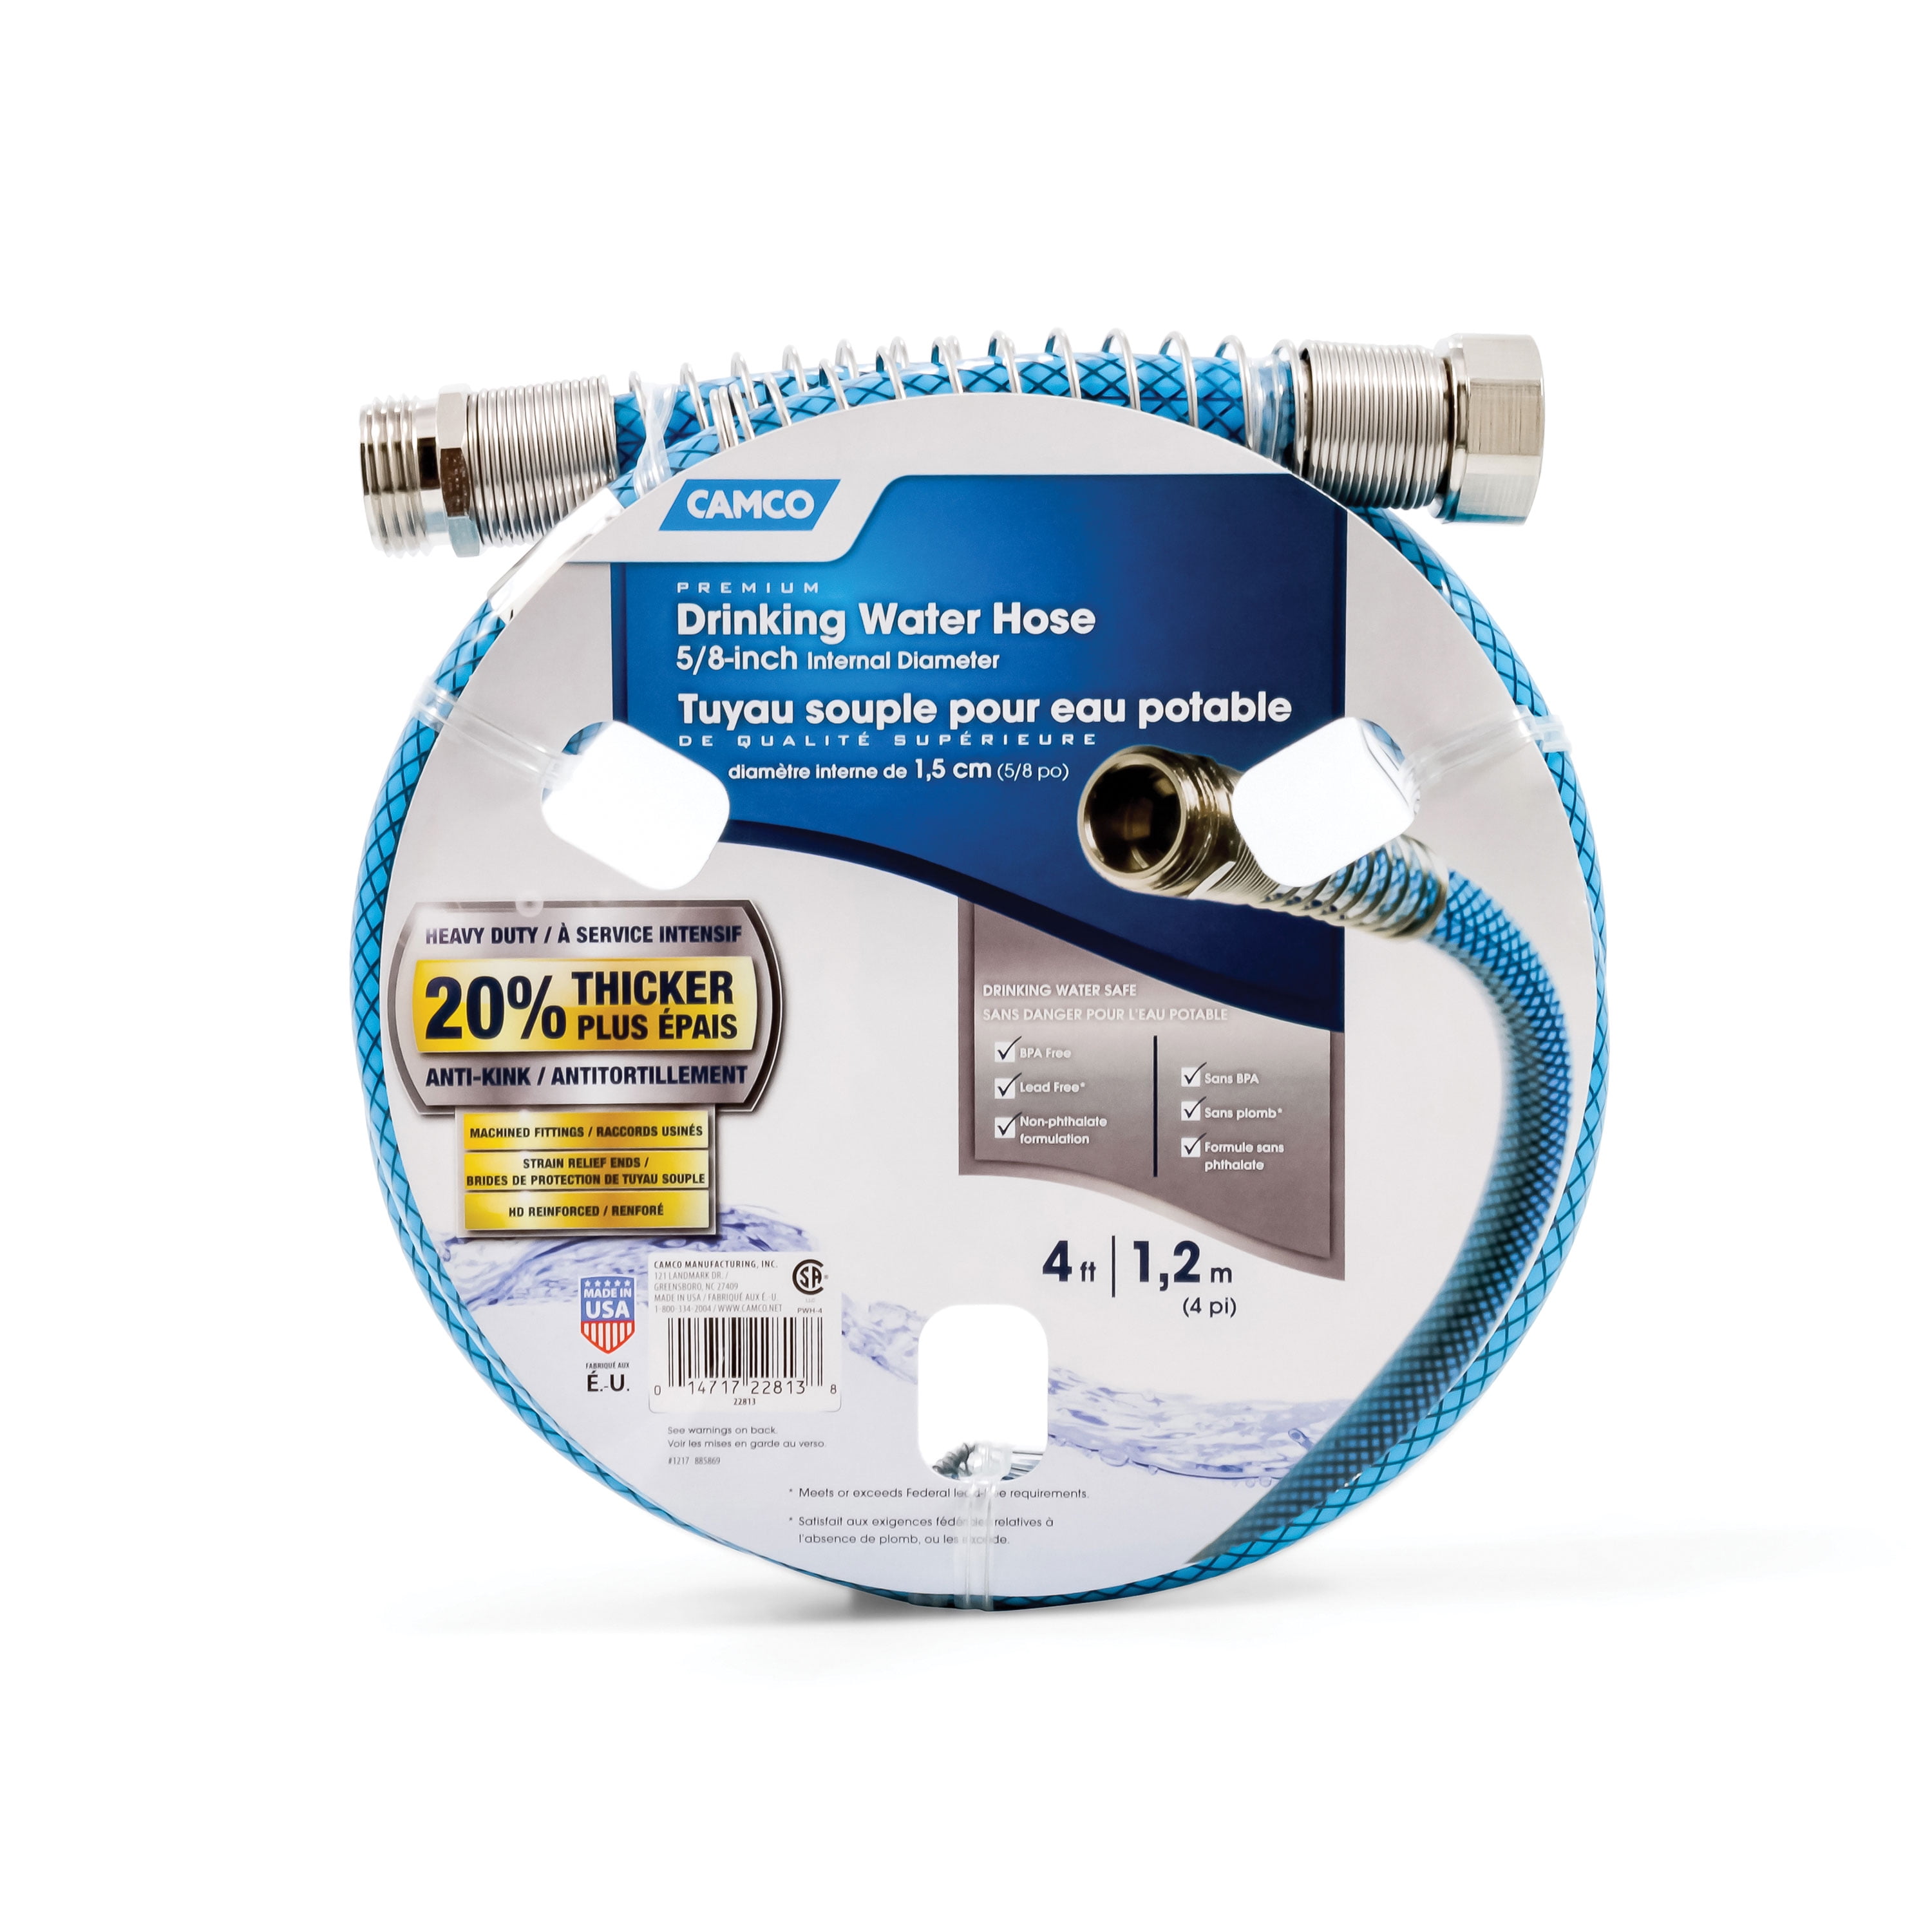 Camco 10ft Premium Drinking Water Hose Lead and BPA Free 20 Anti-Kink Design 